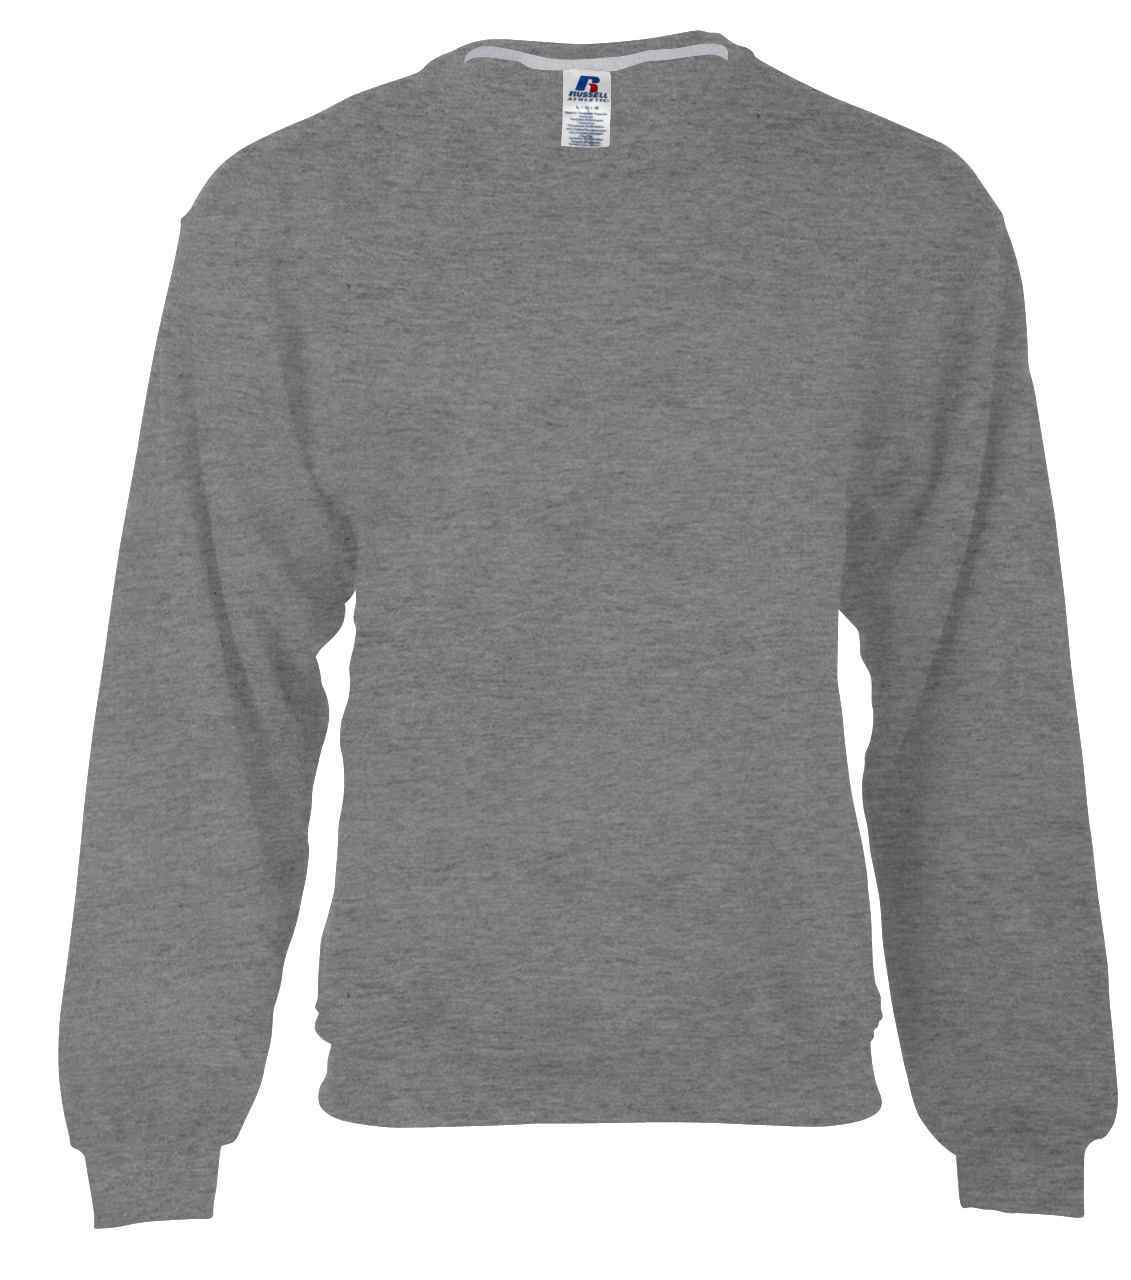 Picture of Russell Dri-Power Fleece Adult Crew Neck